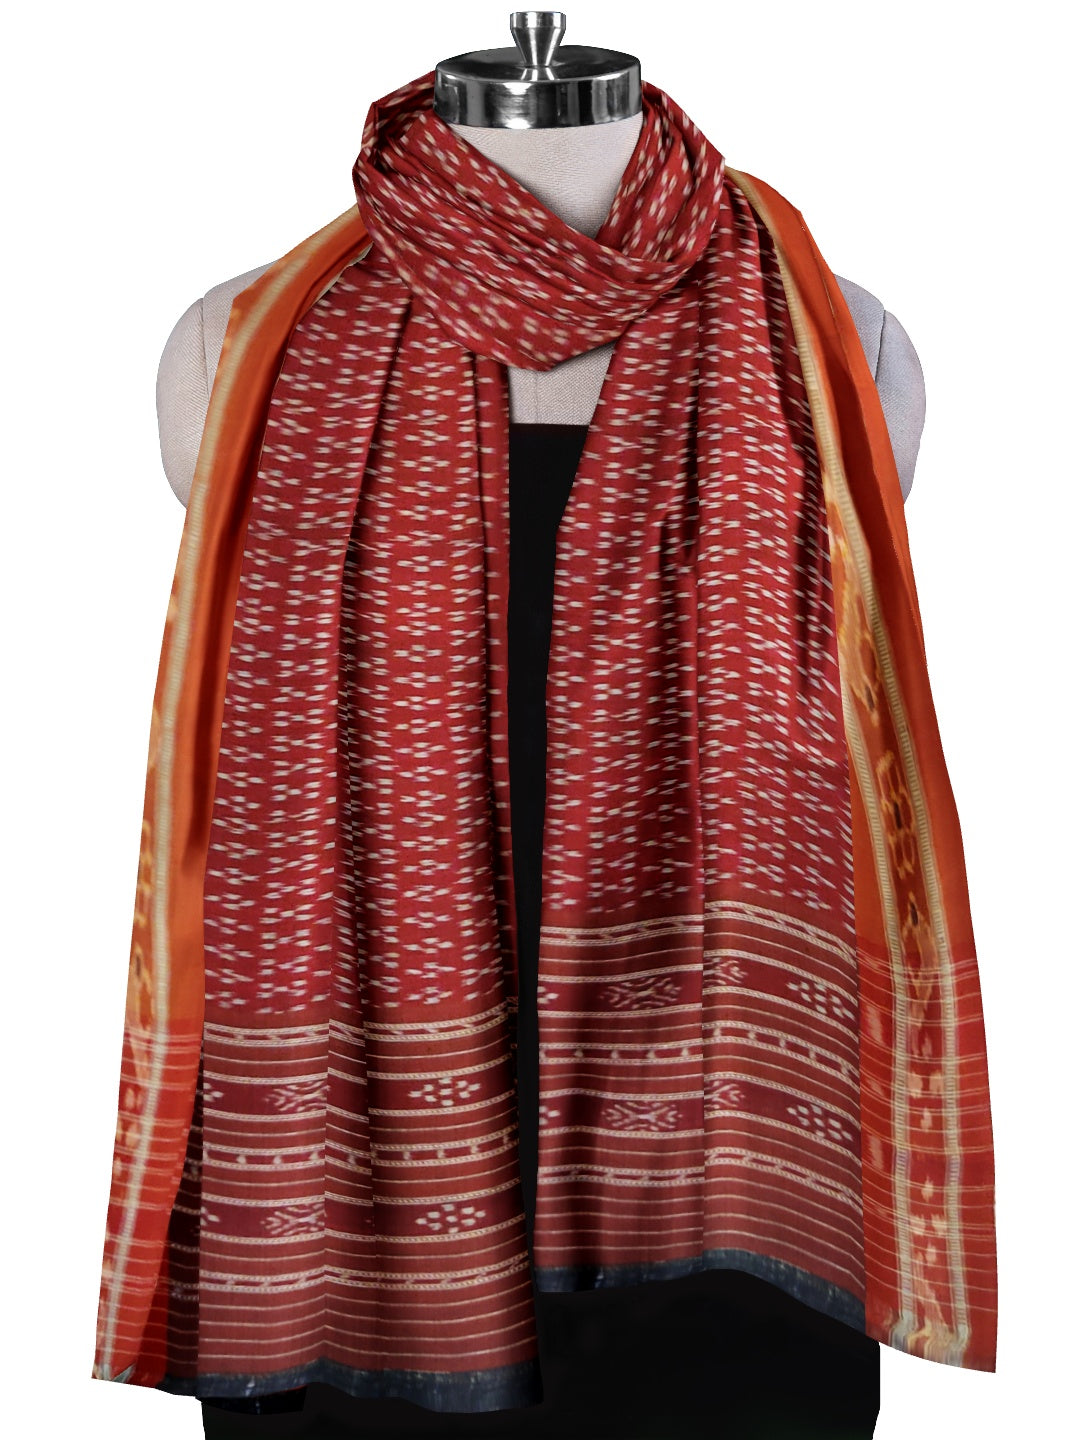 Maroon and Rust Cotton ikat Dupatta with woven motifs